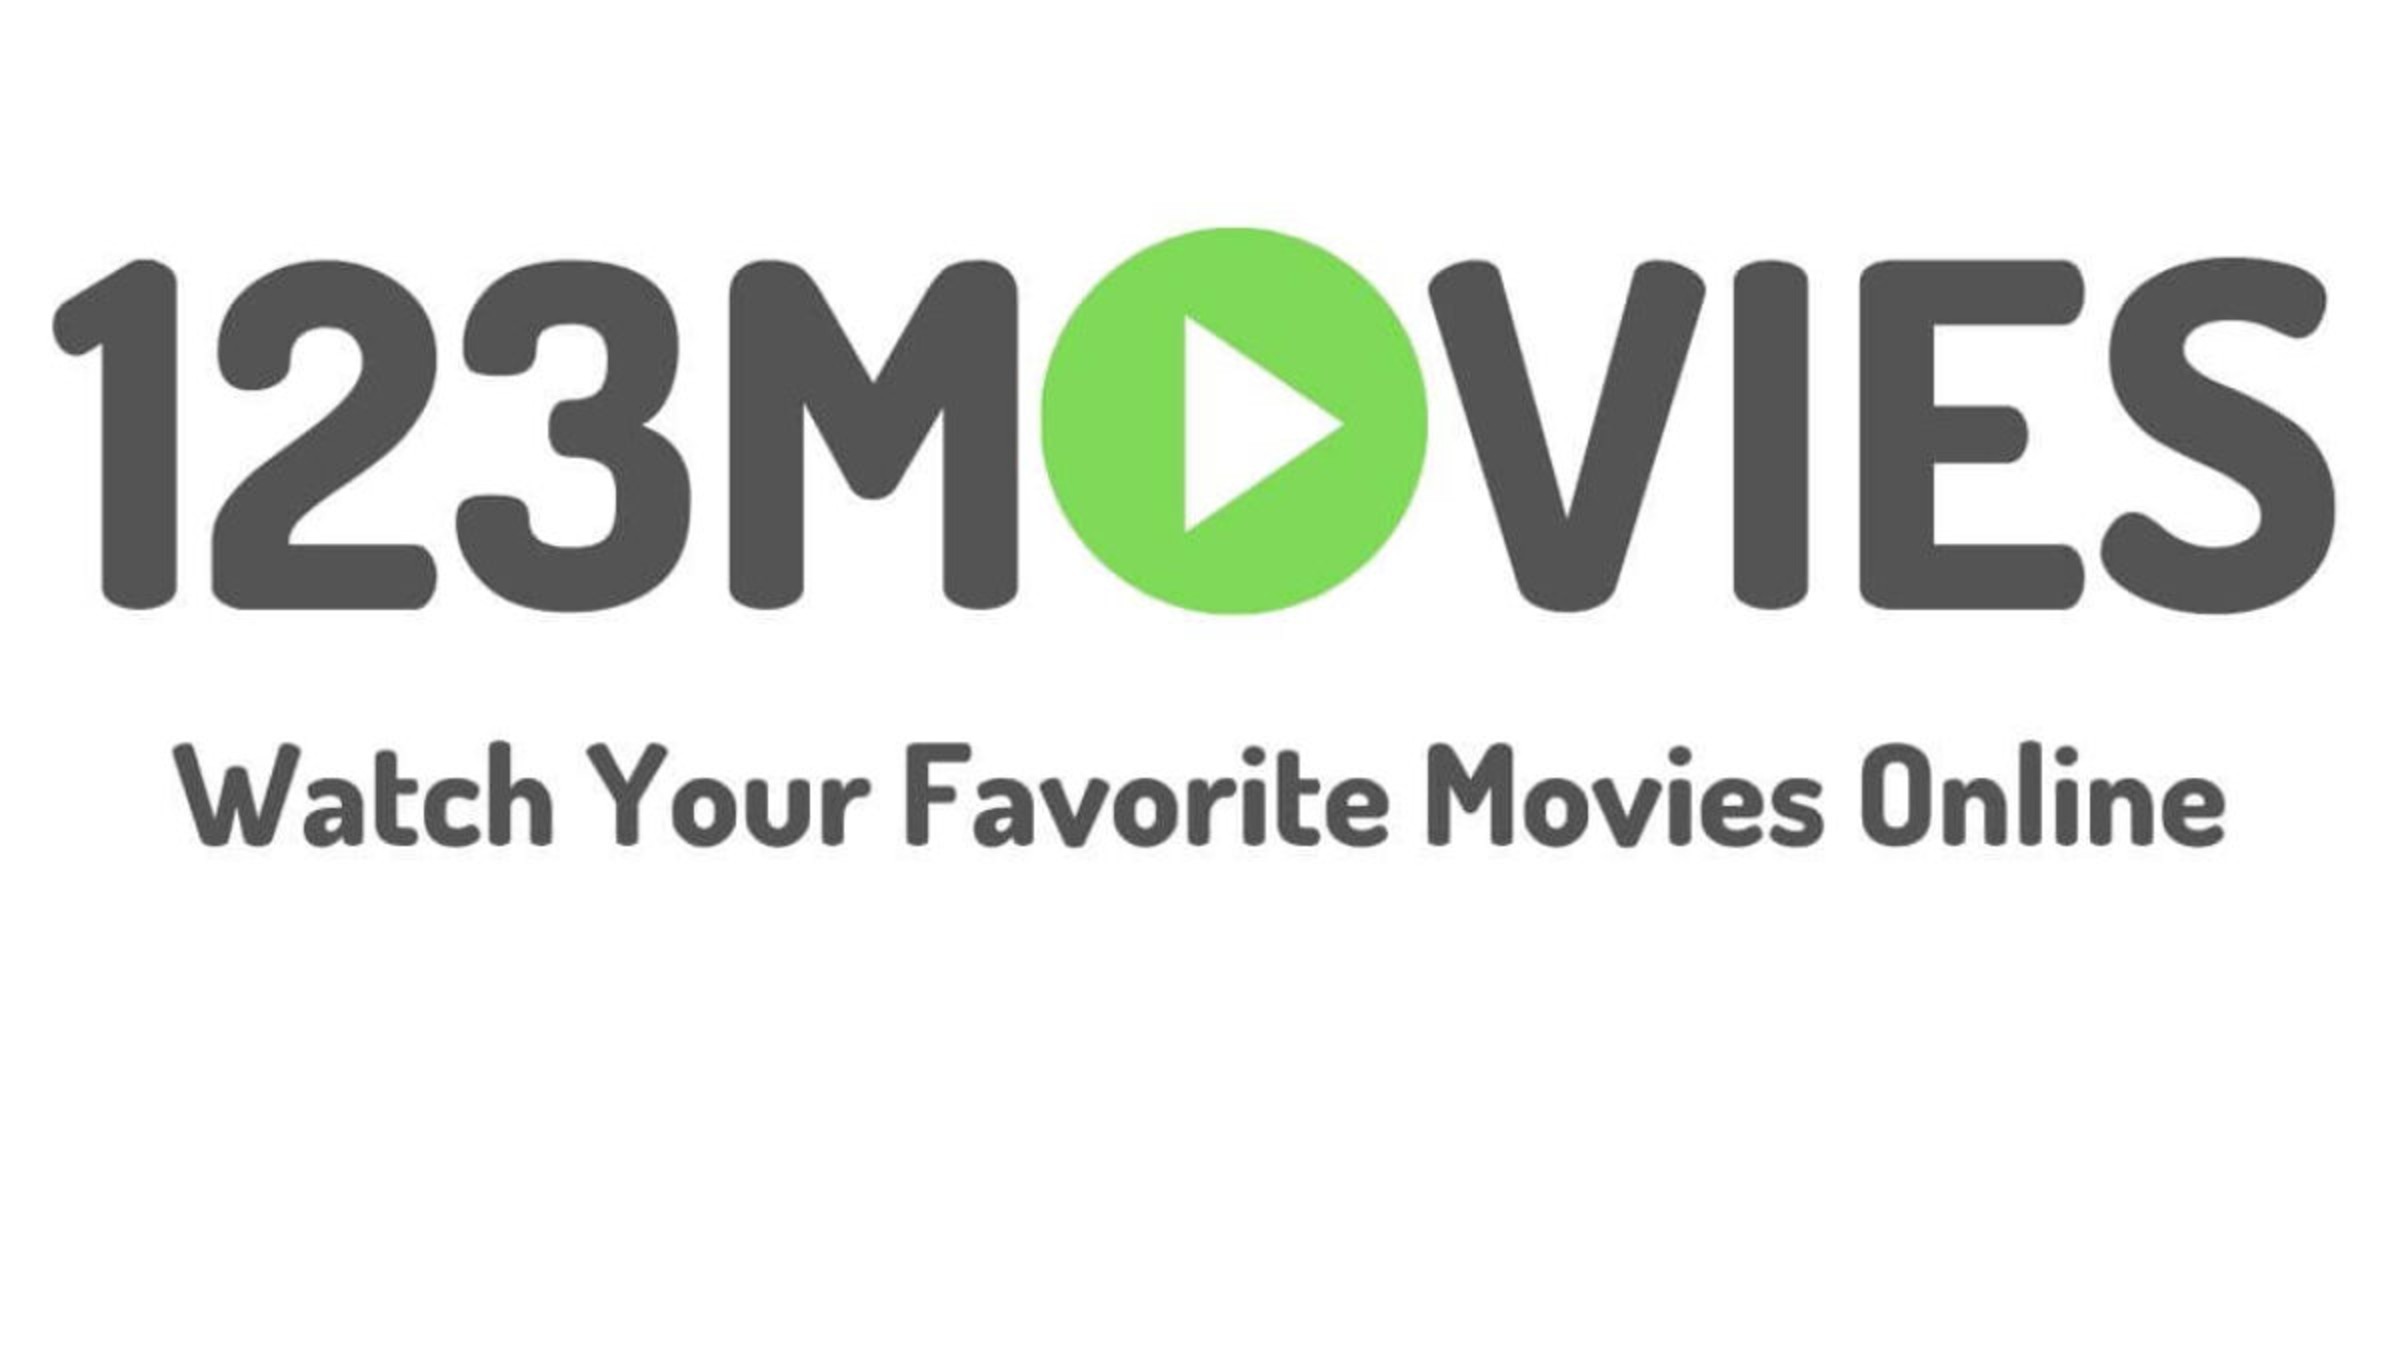 Why Is 123movies So Popular?